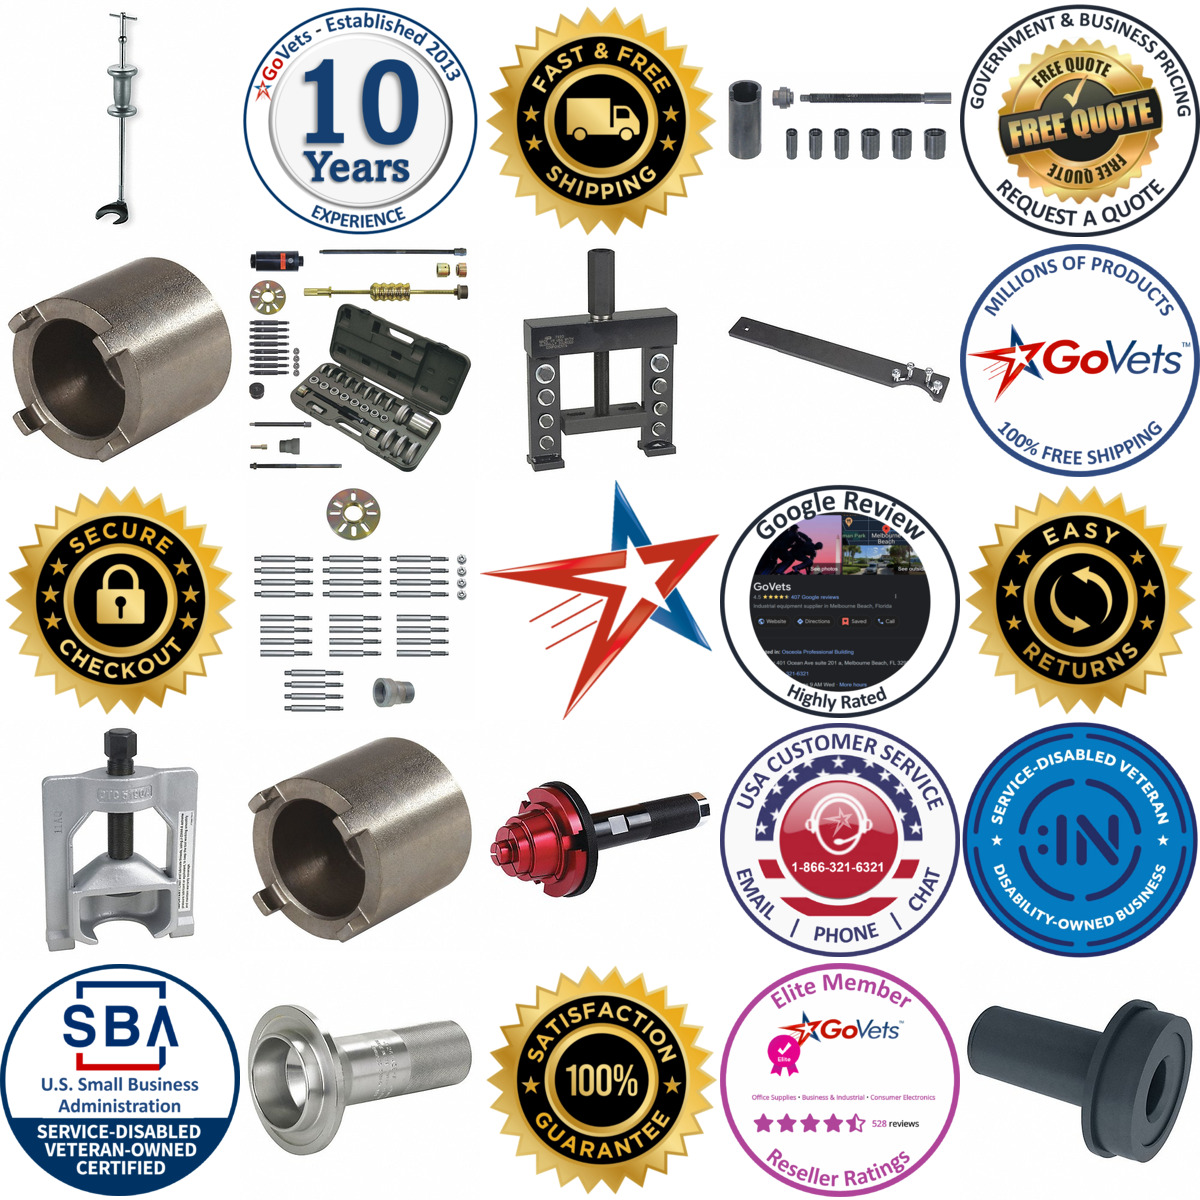 A selection of Drive Train Tools products on GoVets